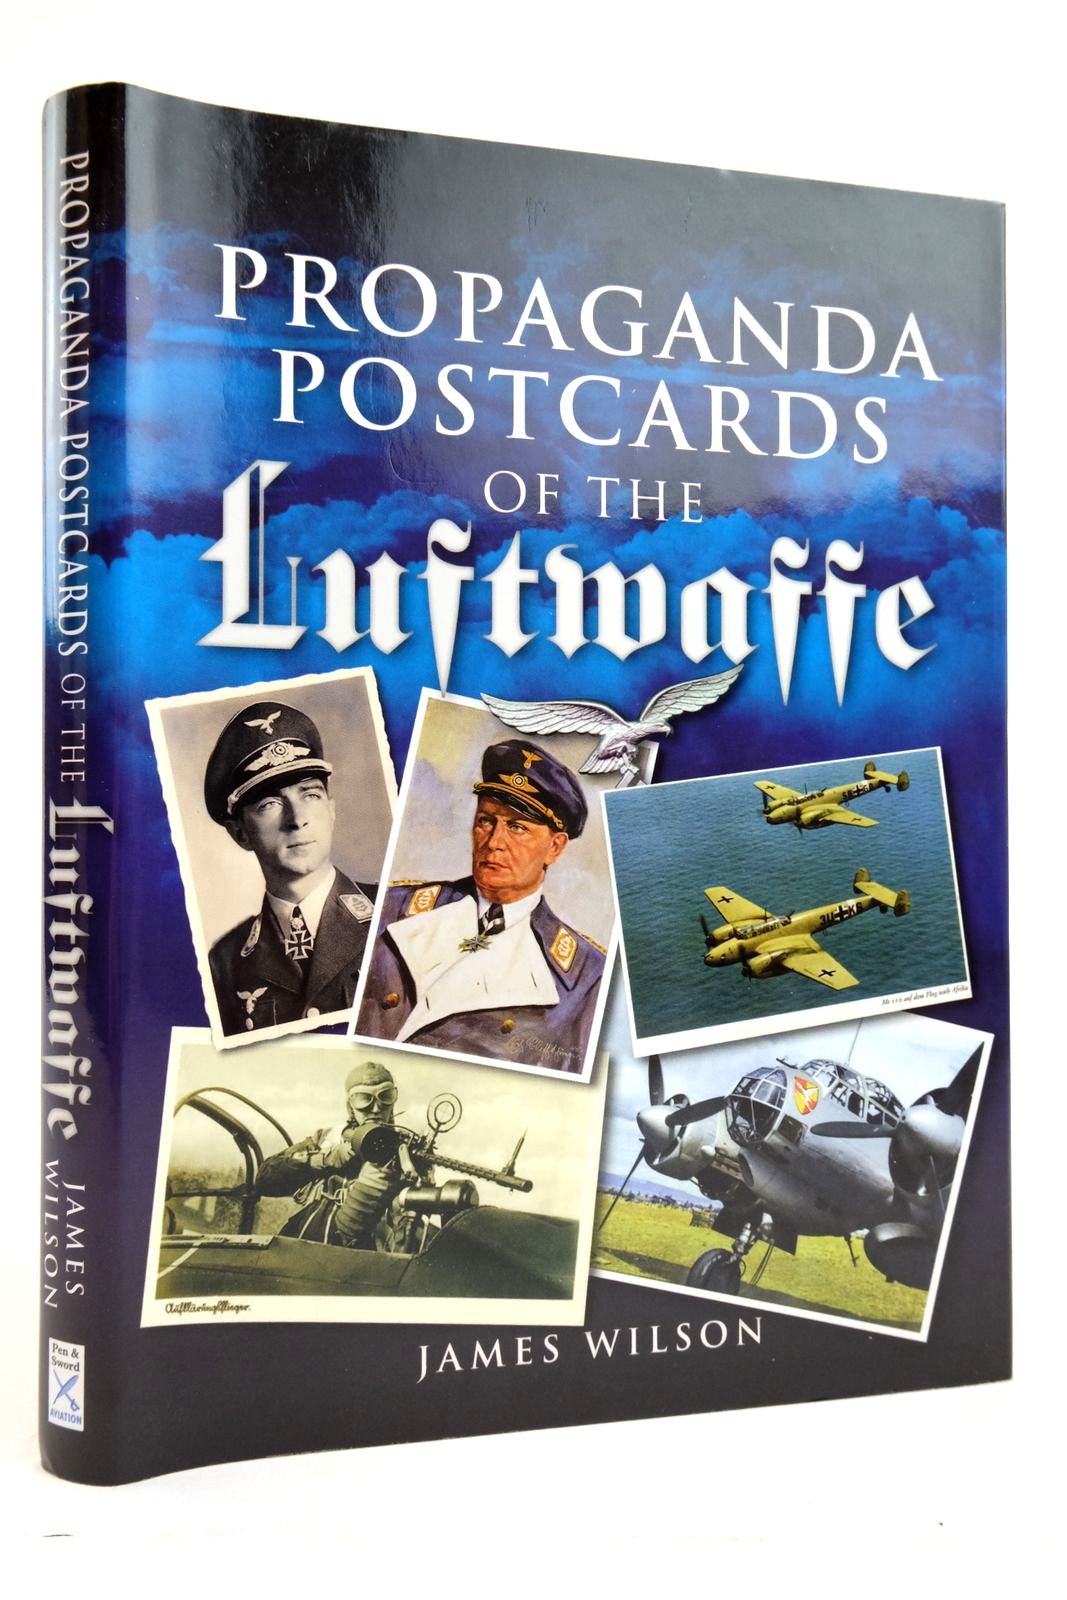 Photo of PROPAGANDA POSTCARDS OF THE LUFTWAFFE written by Wilson, James published by Pen & Sword Military (STOCK CODE: 2135814)  for sale by Stella & Rose's Books